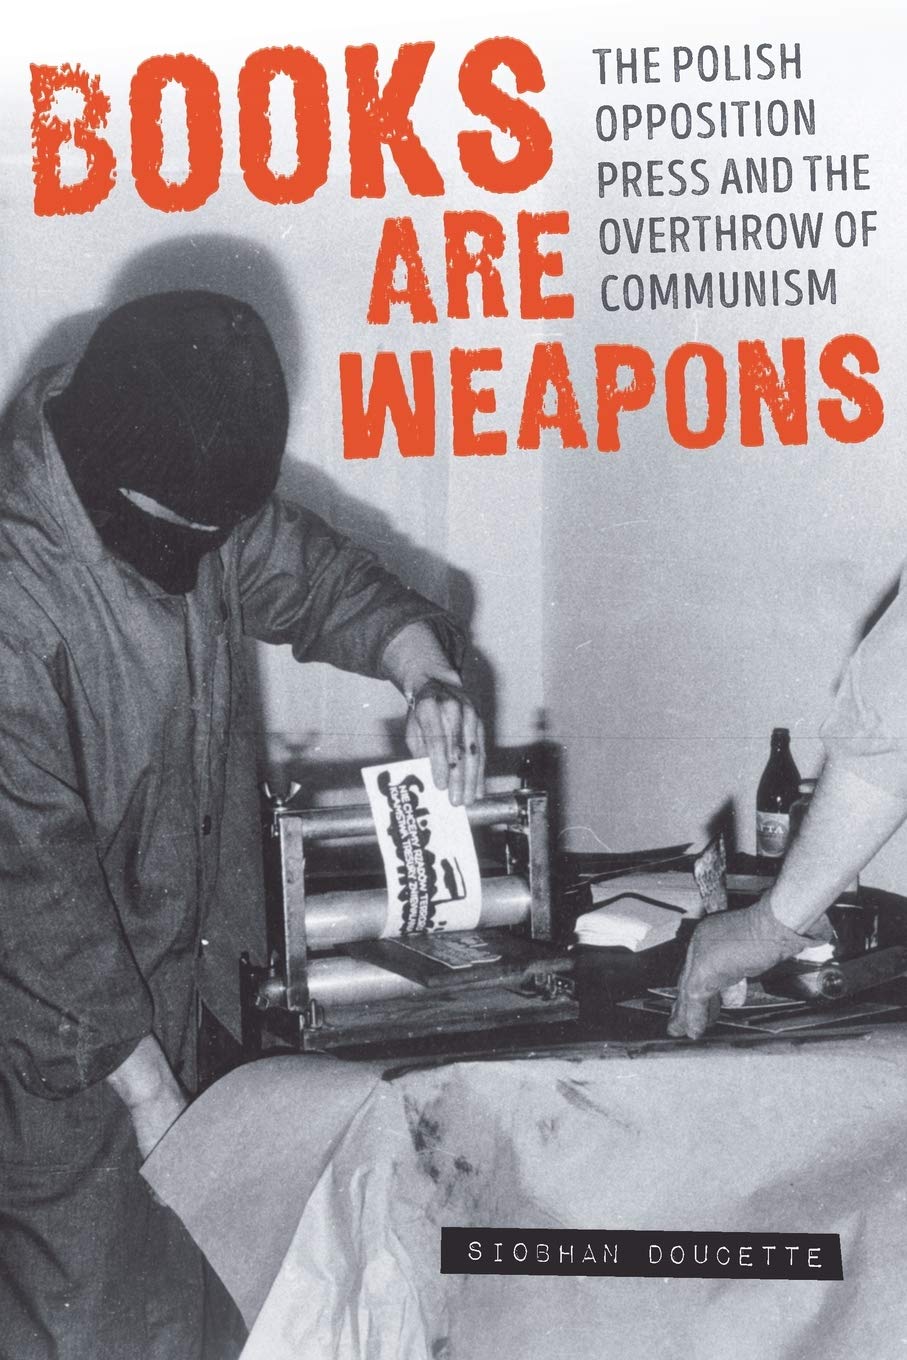 Books are weapons